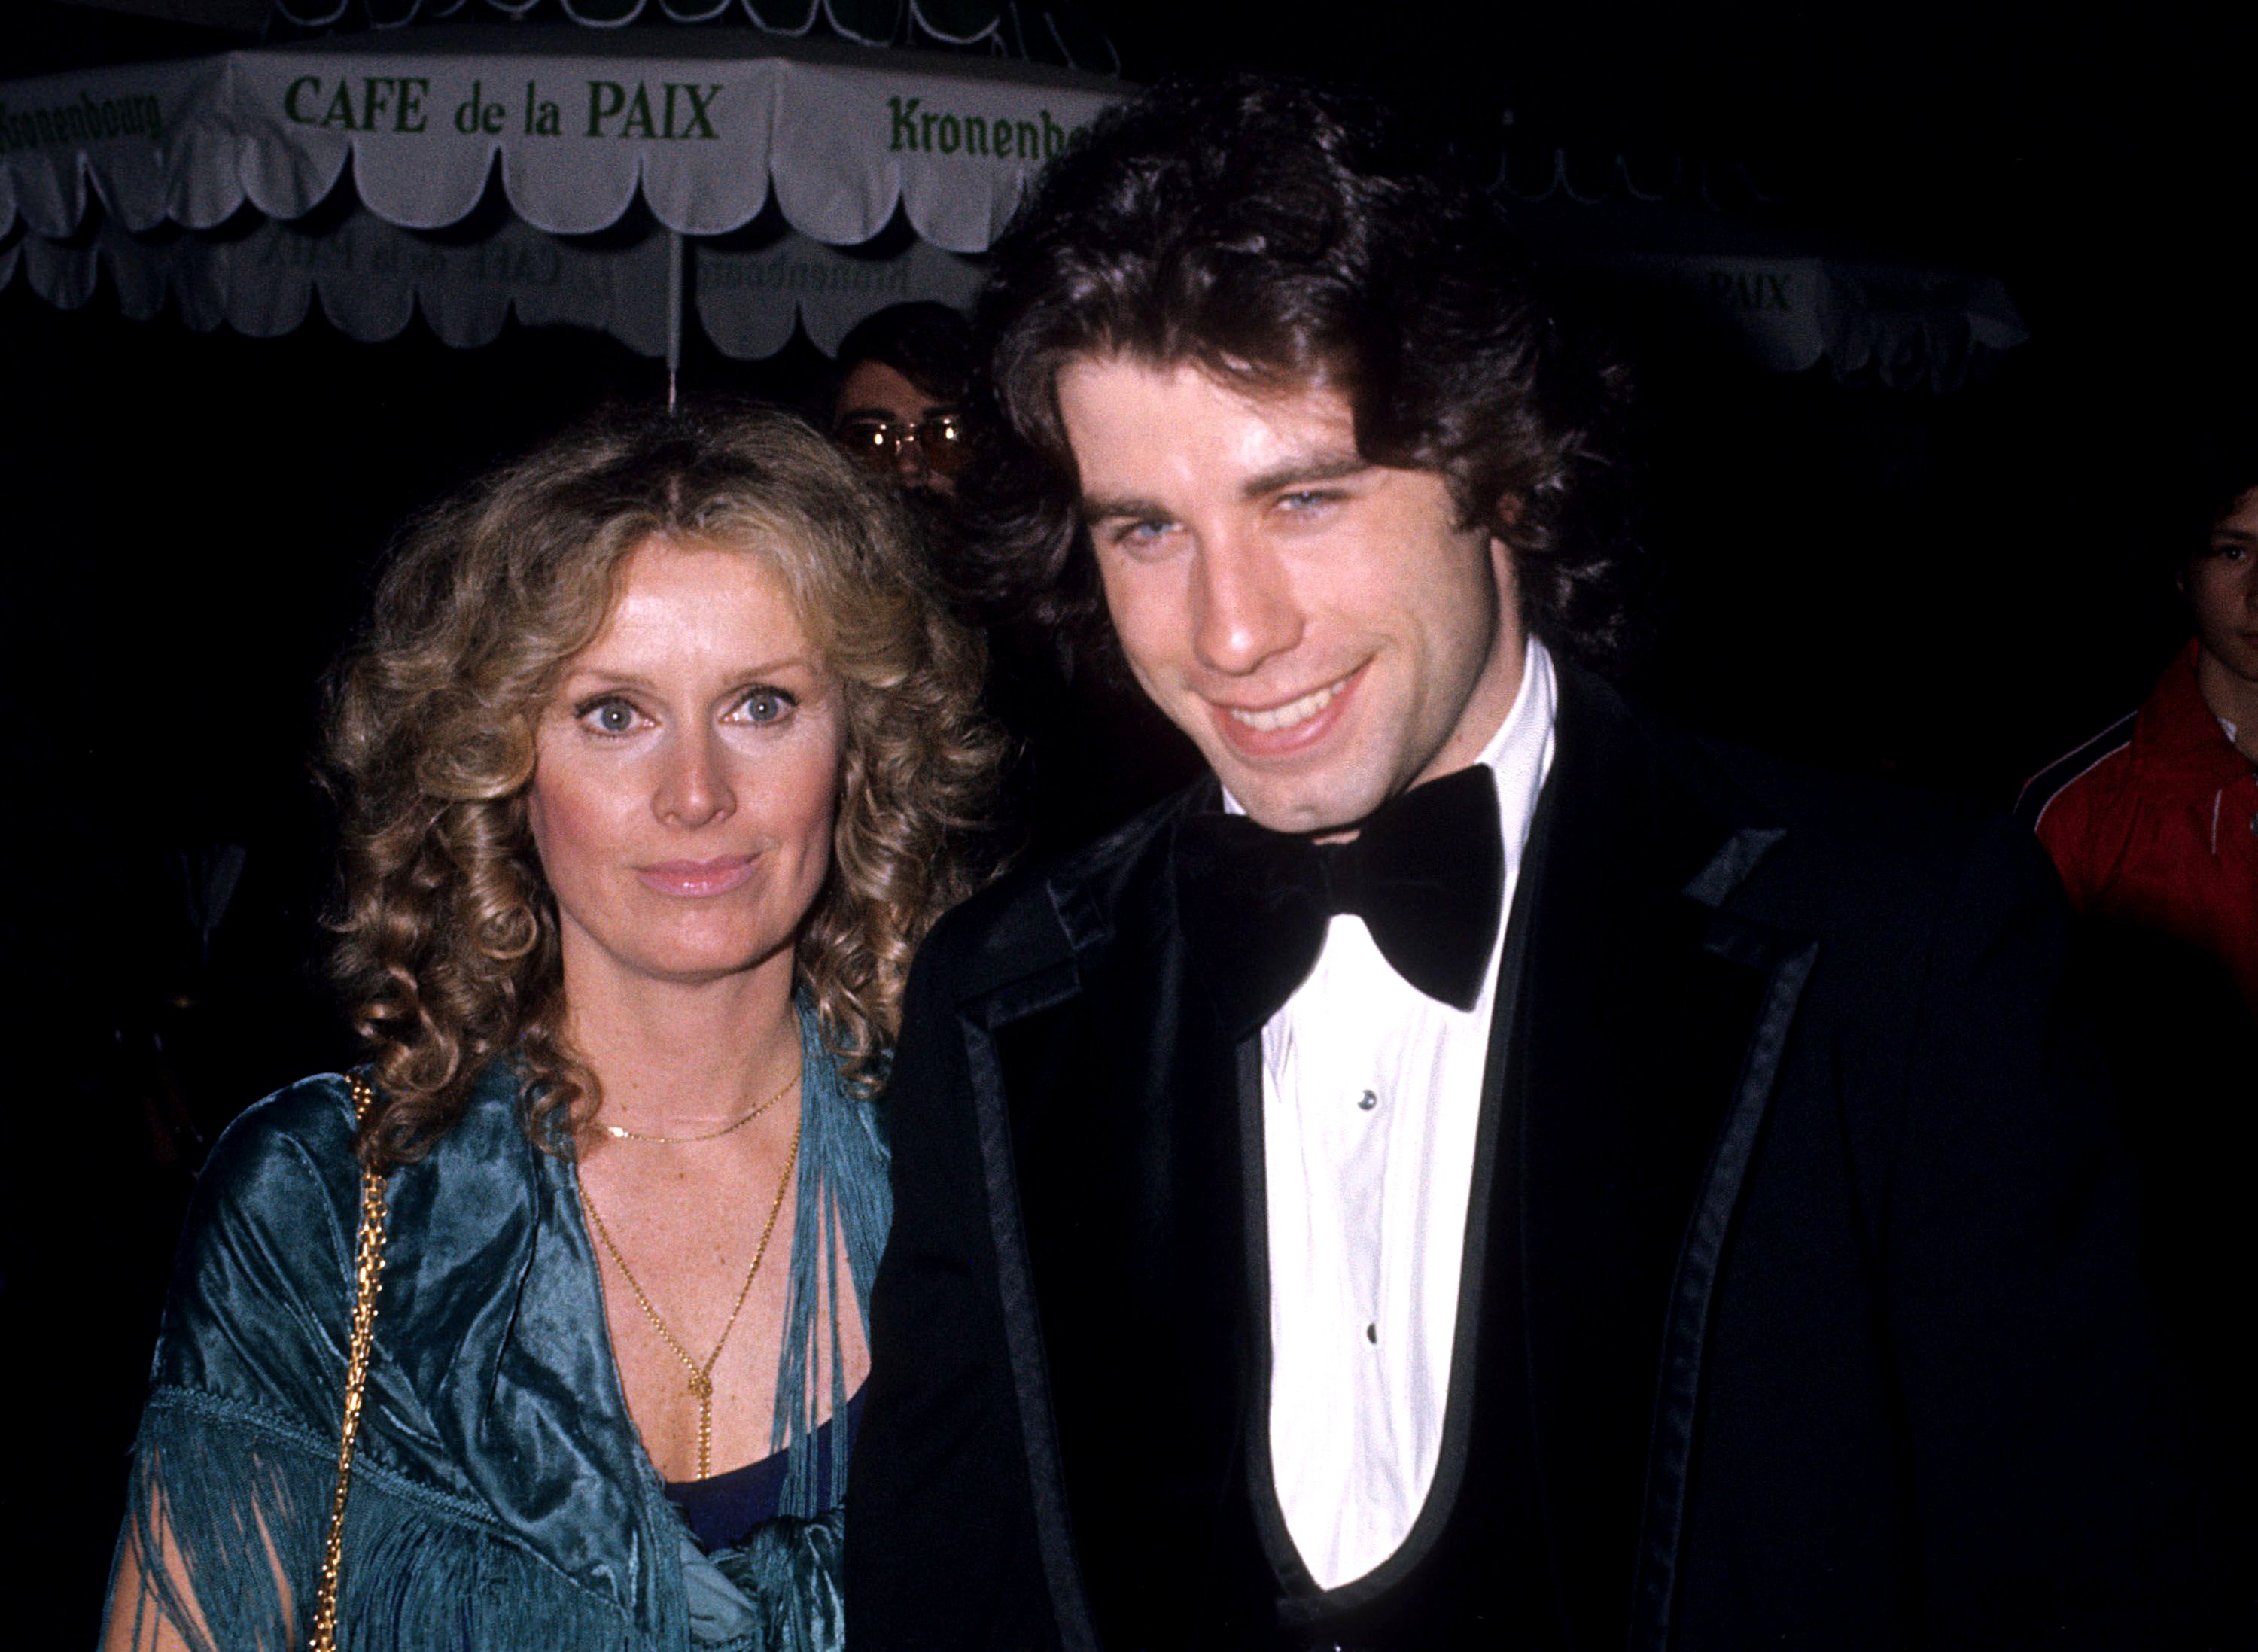 John Travolta and Diana Hyland in Los Angeles on December 8th 1976 | Source: Getty Images